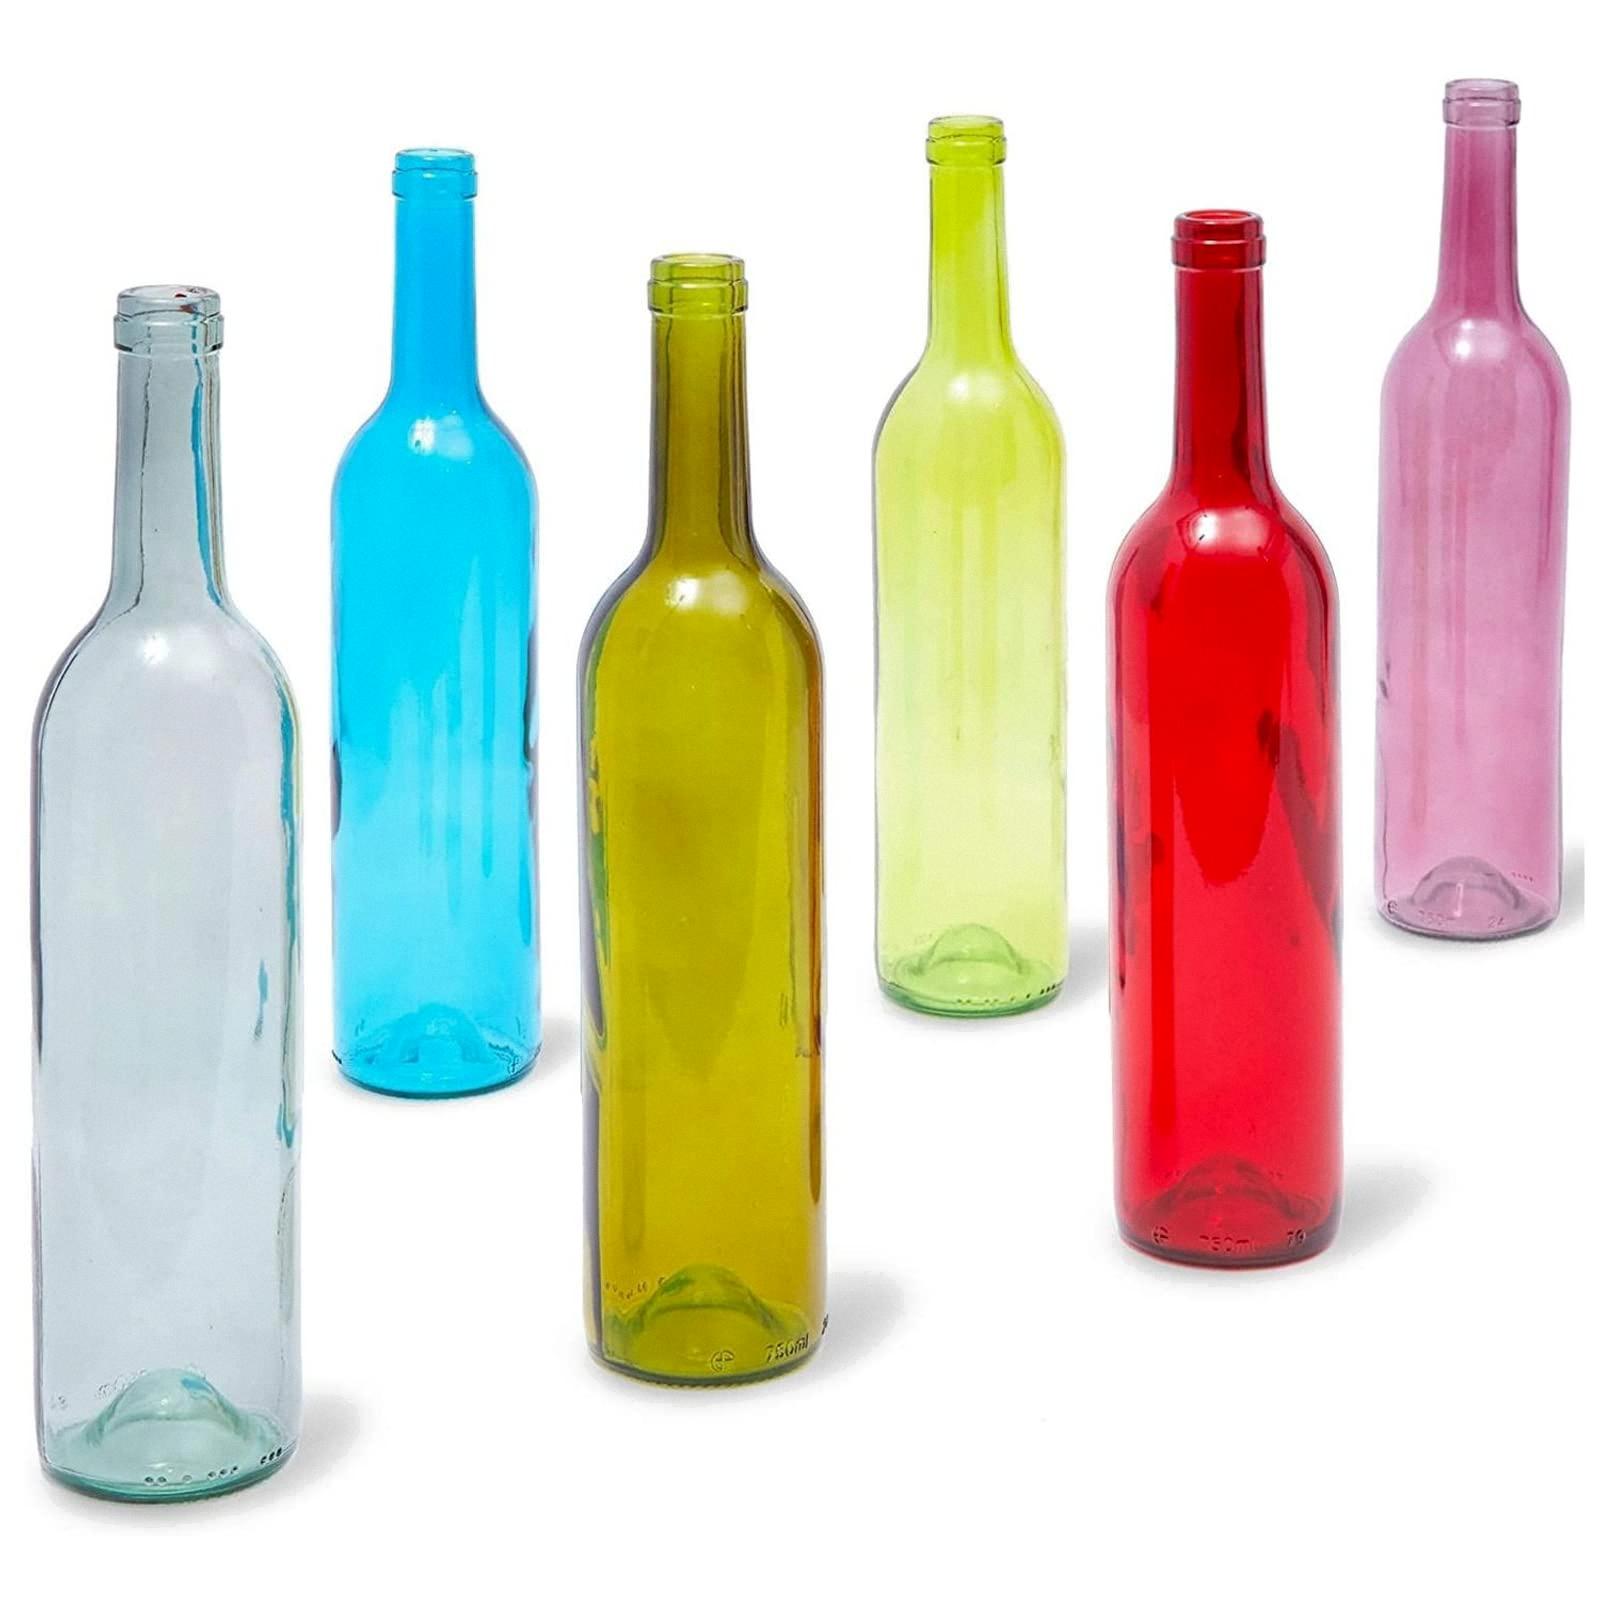 colors of wine bottles